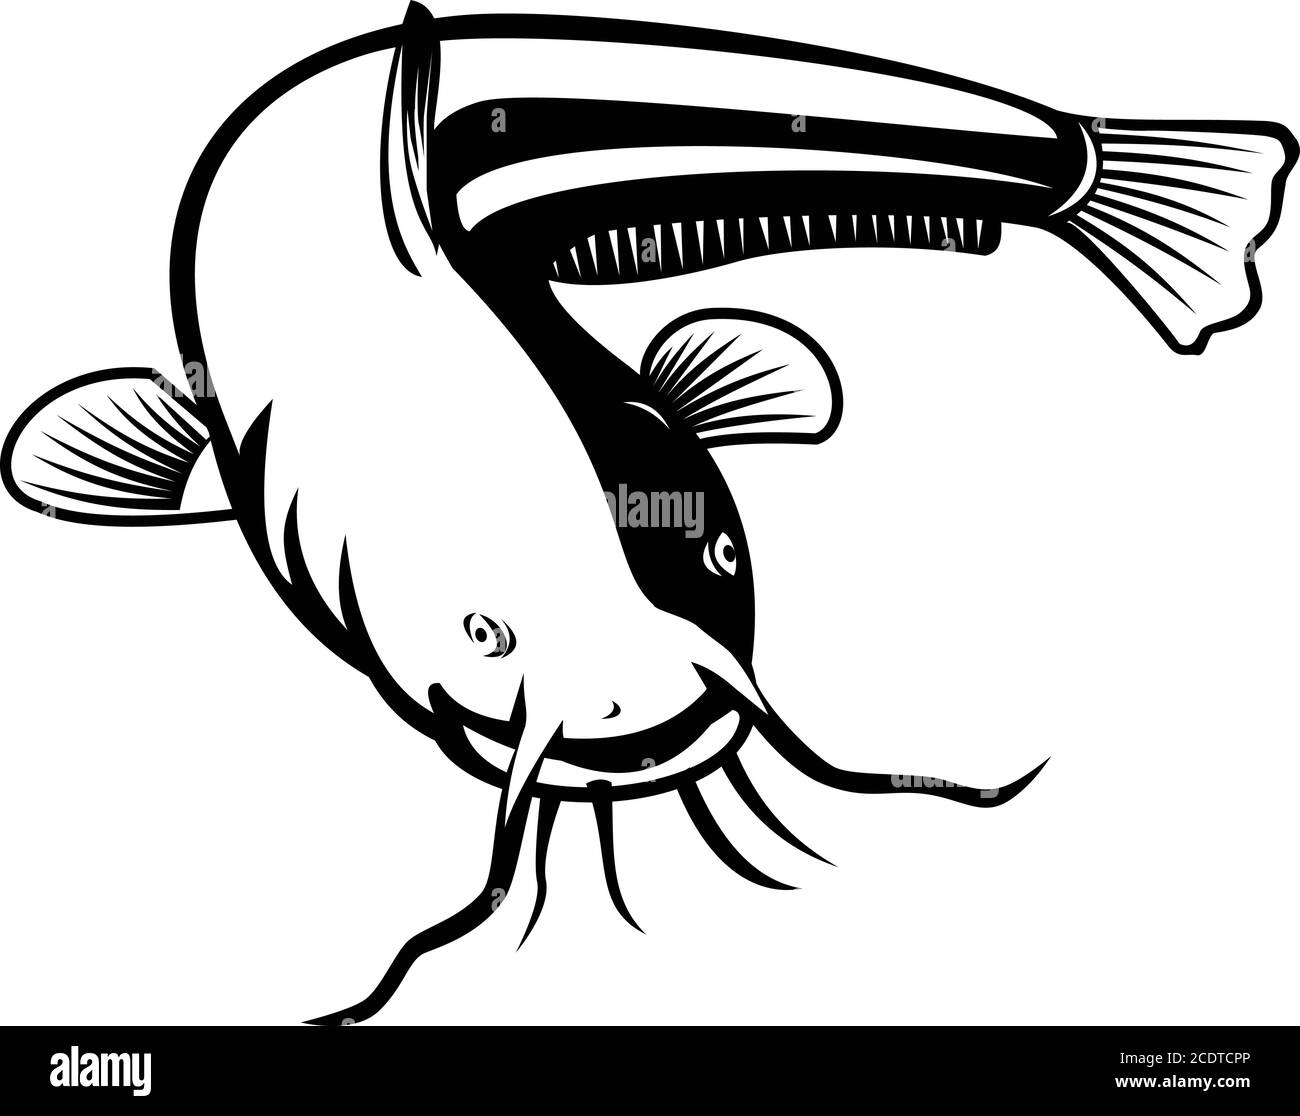 Woodcut style illustration of wels catfish also called sheatfish, a species of large catfish native to wide areas of central, southern, and eastern Eu Stock Vector